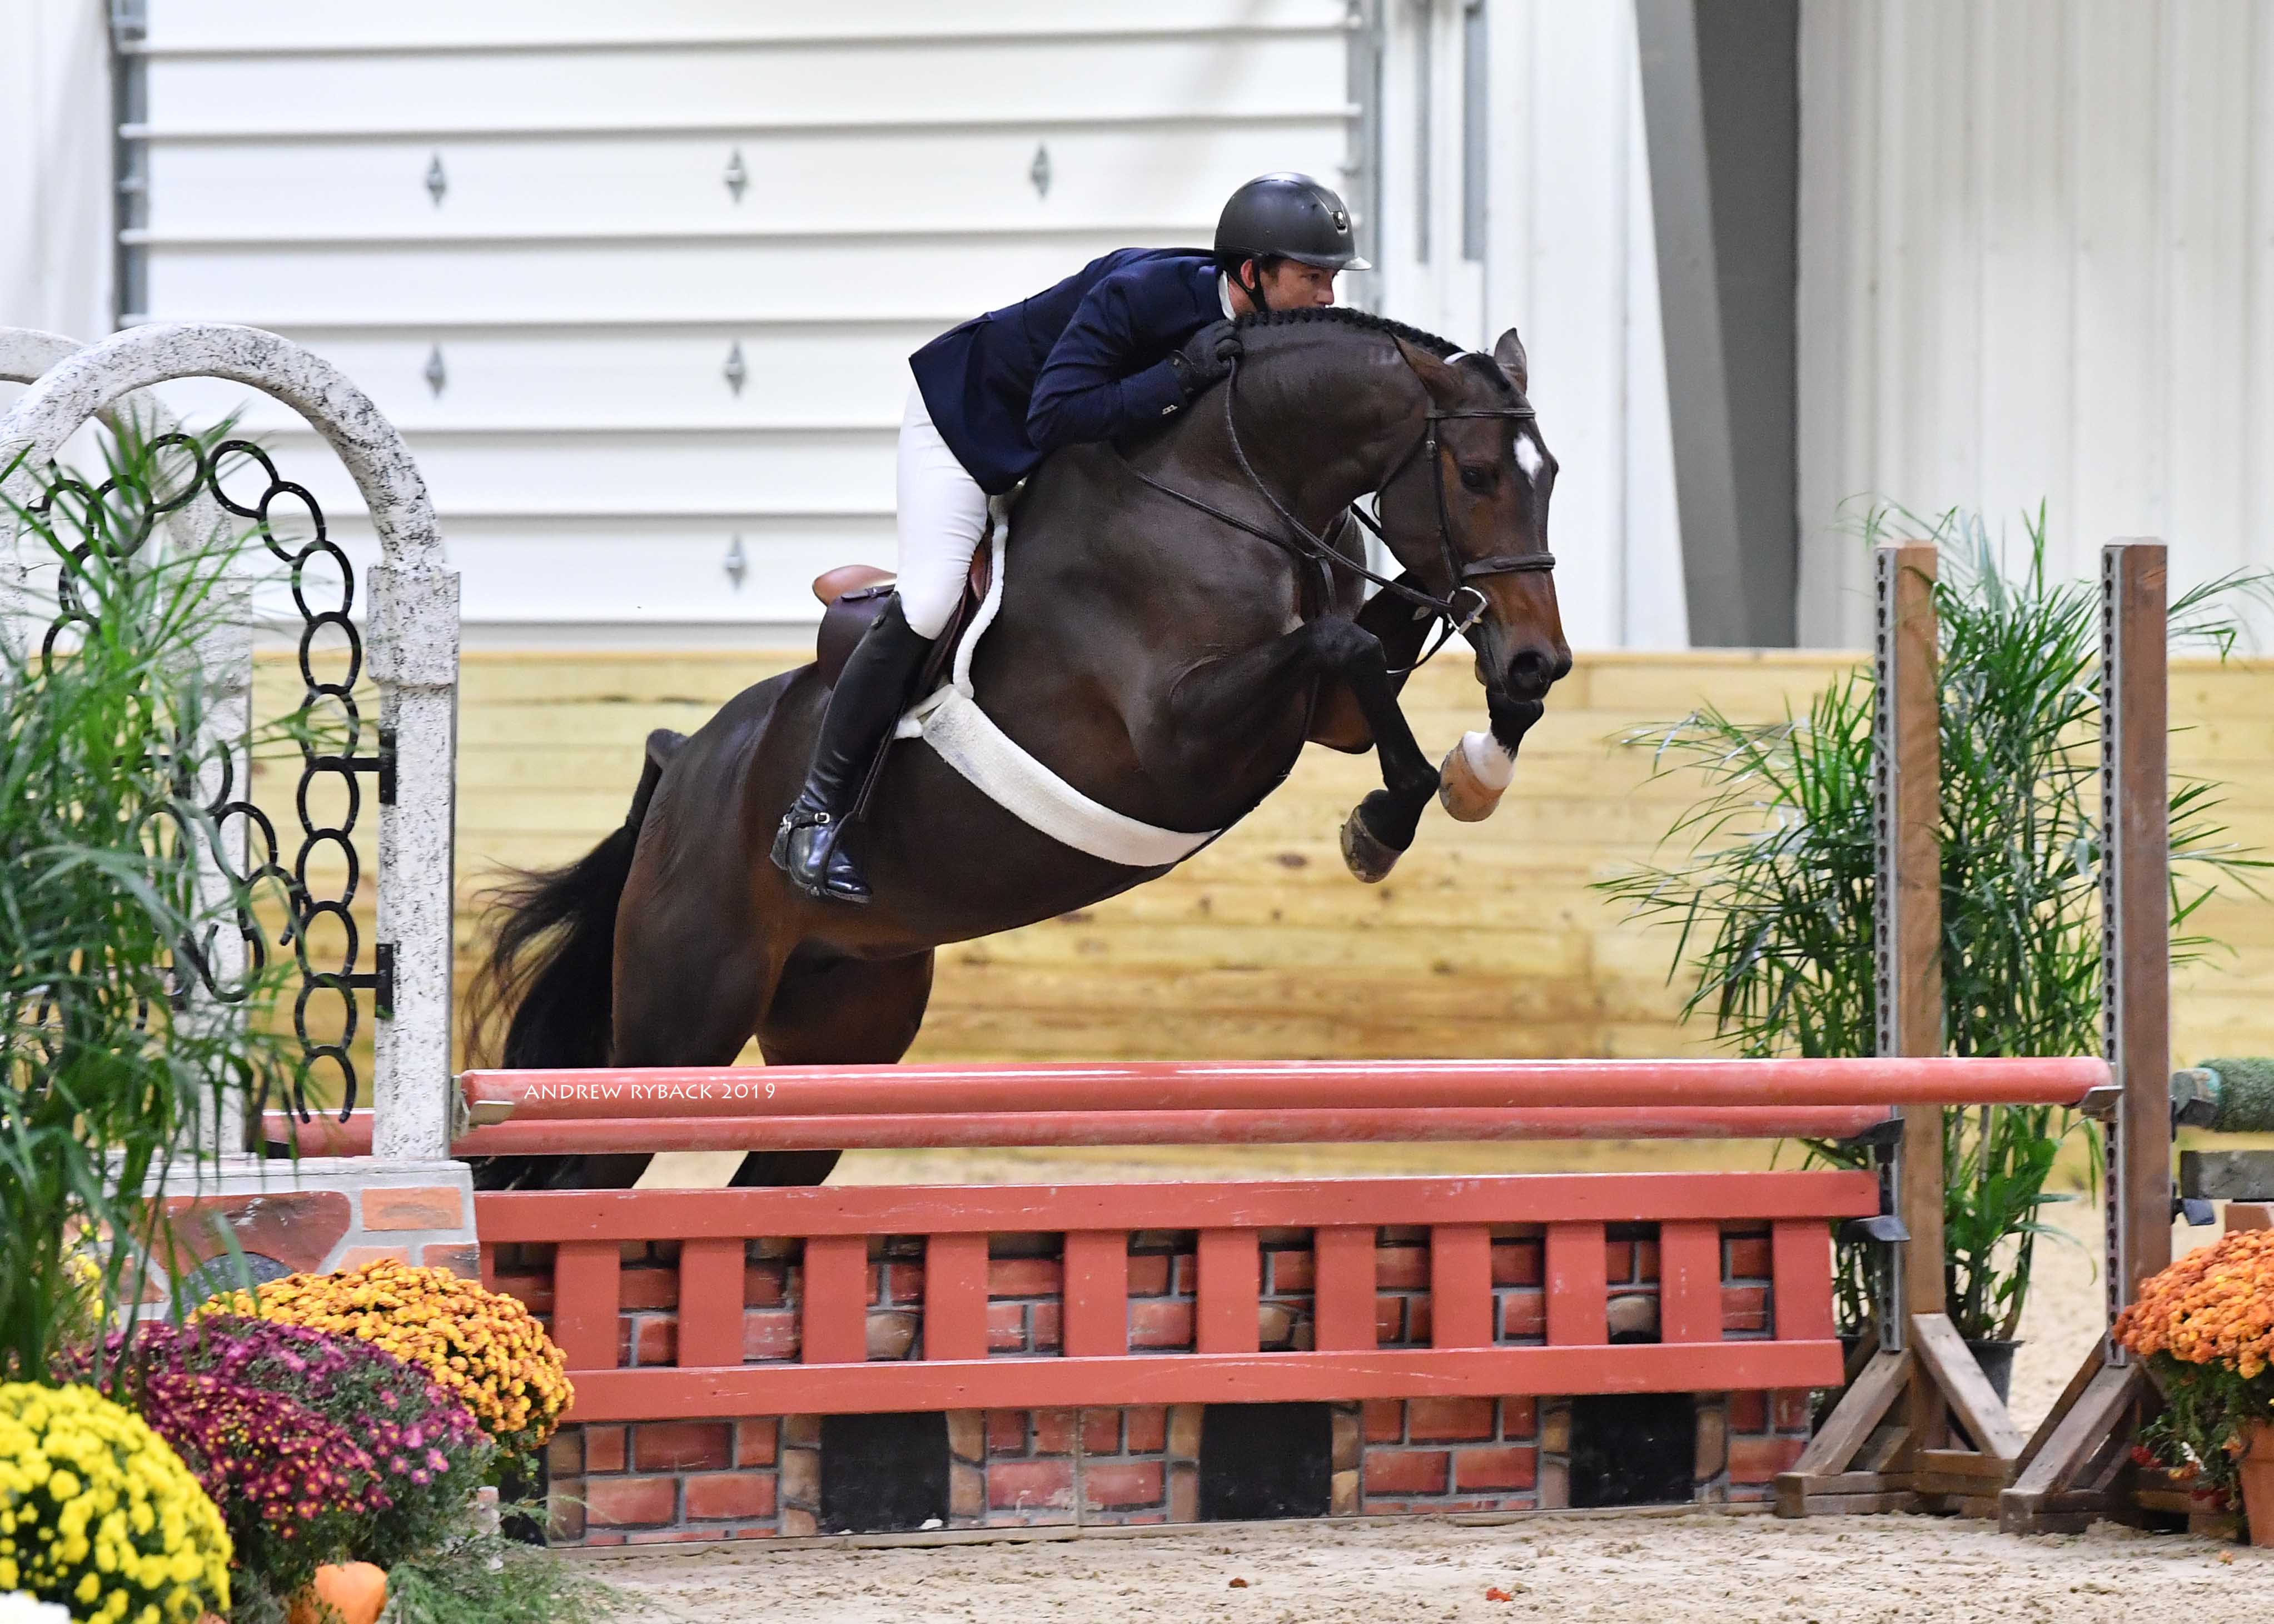 Greg Crolick and Corallo Z Take Top Honors in the $40,000 USHJA  International Hunter Derby - World Equestrian Center